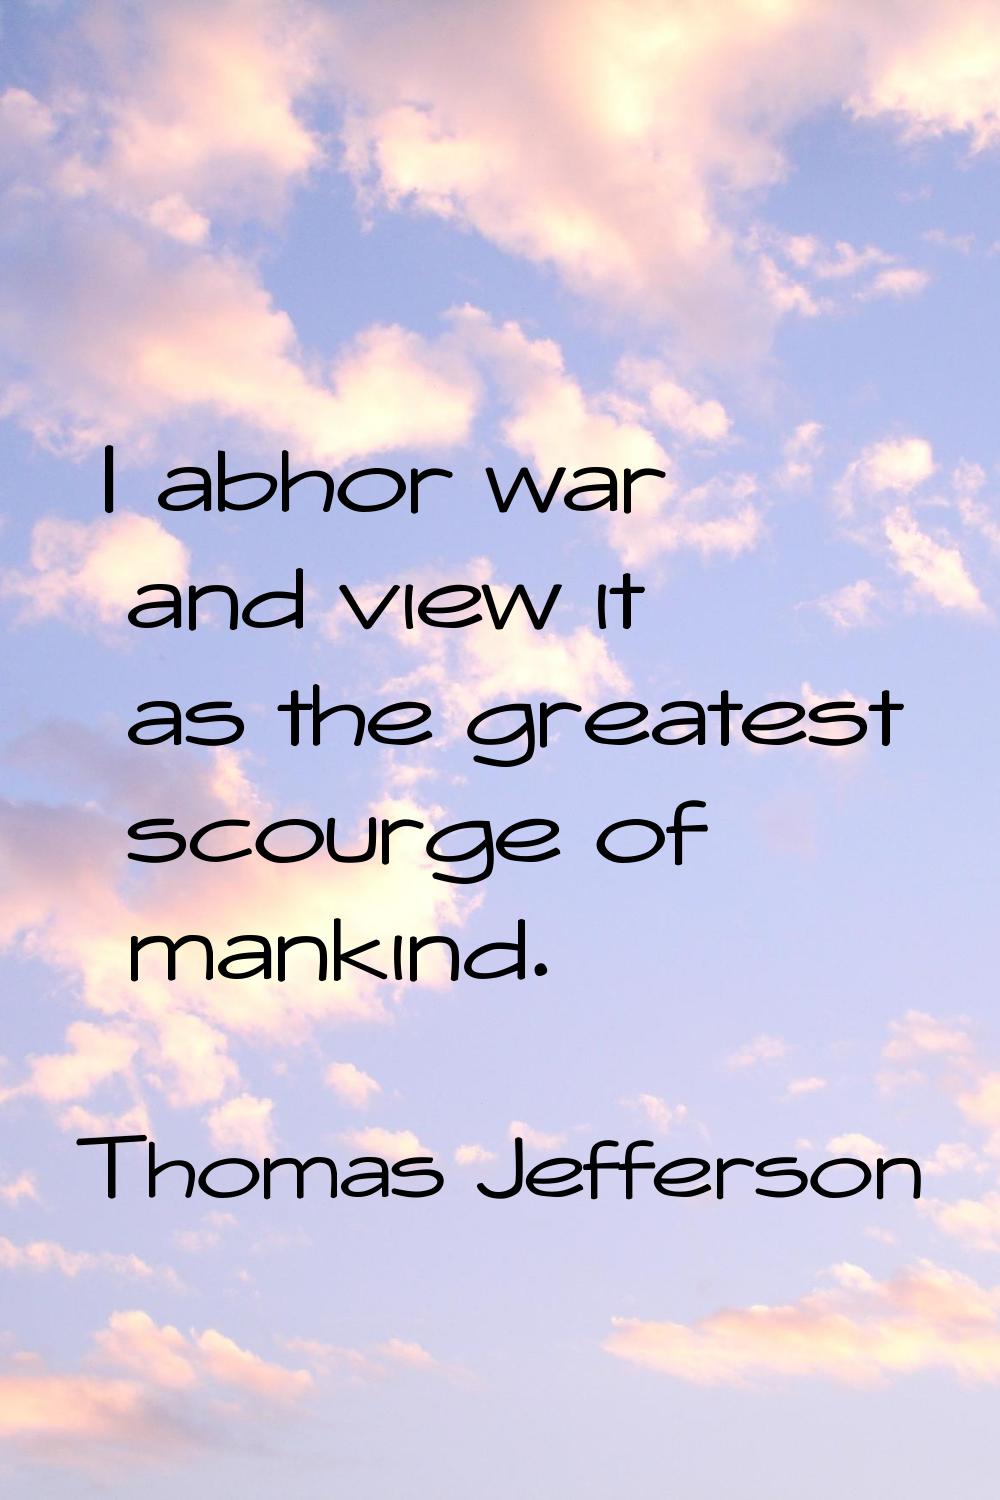 I abhor war and view it as the greatest scourge of mankind.